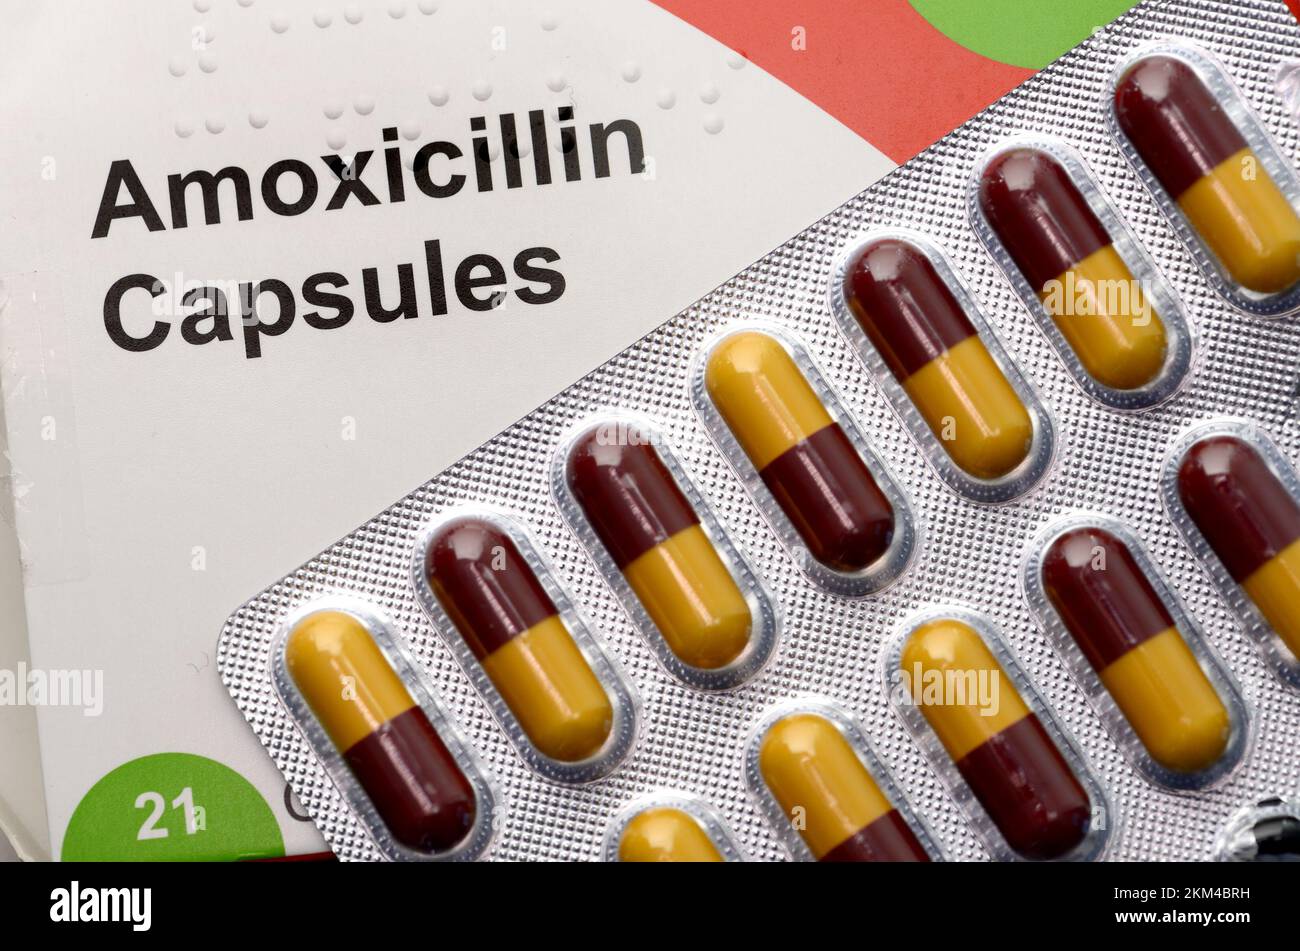 Amoxicillin capsules - penicilin-based antibiotic for treating infections Stock Photo